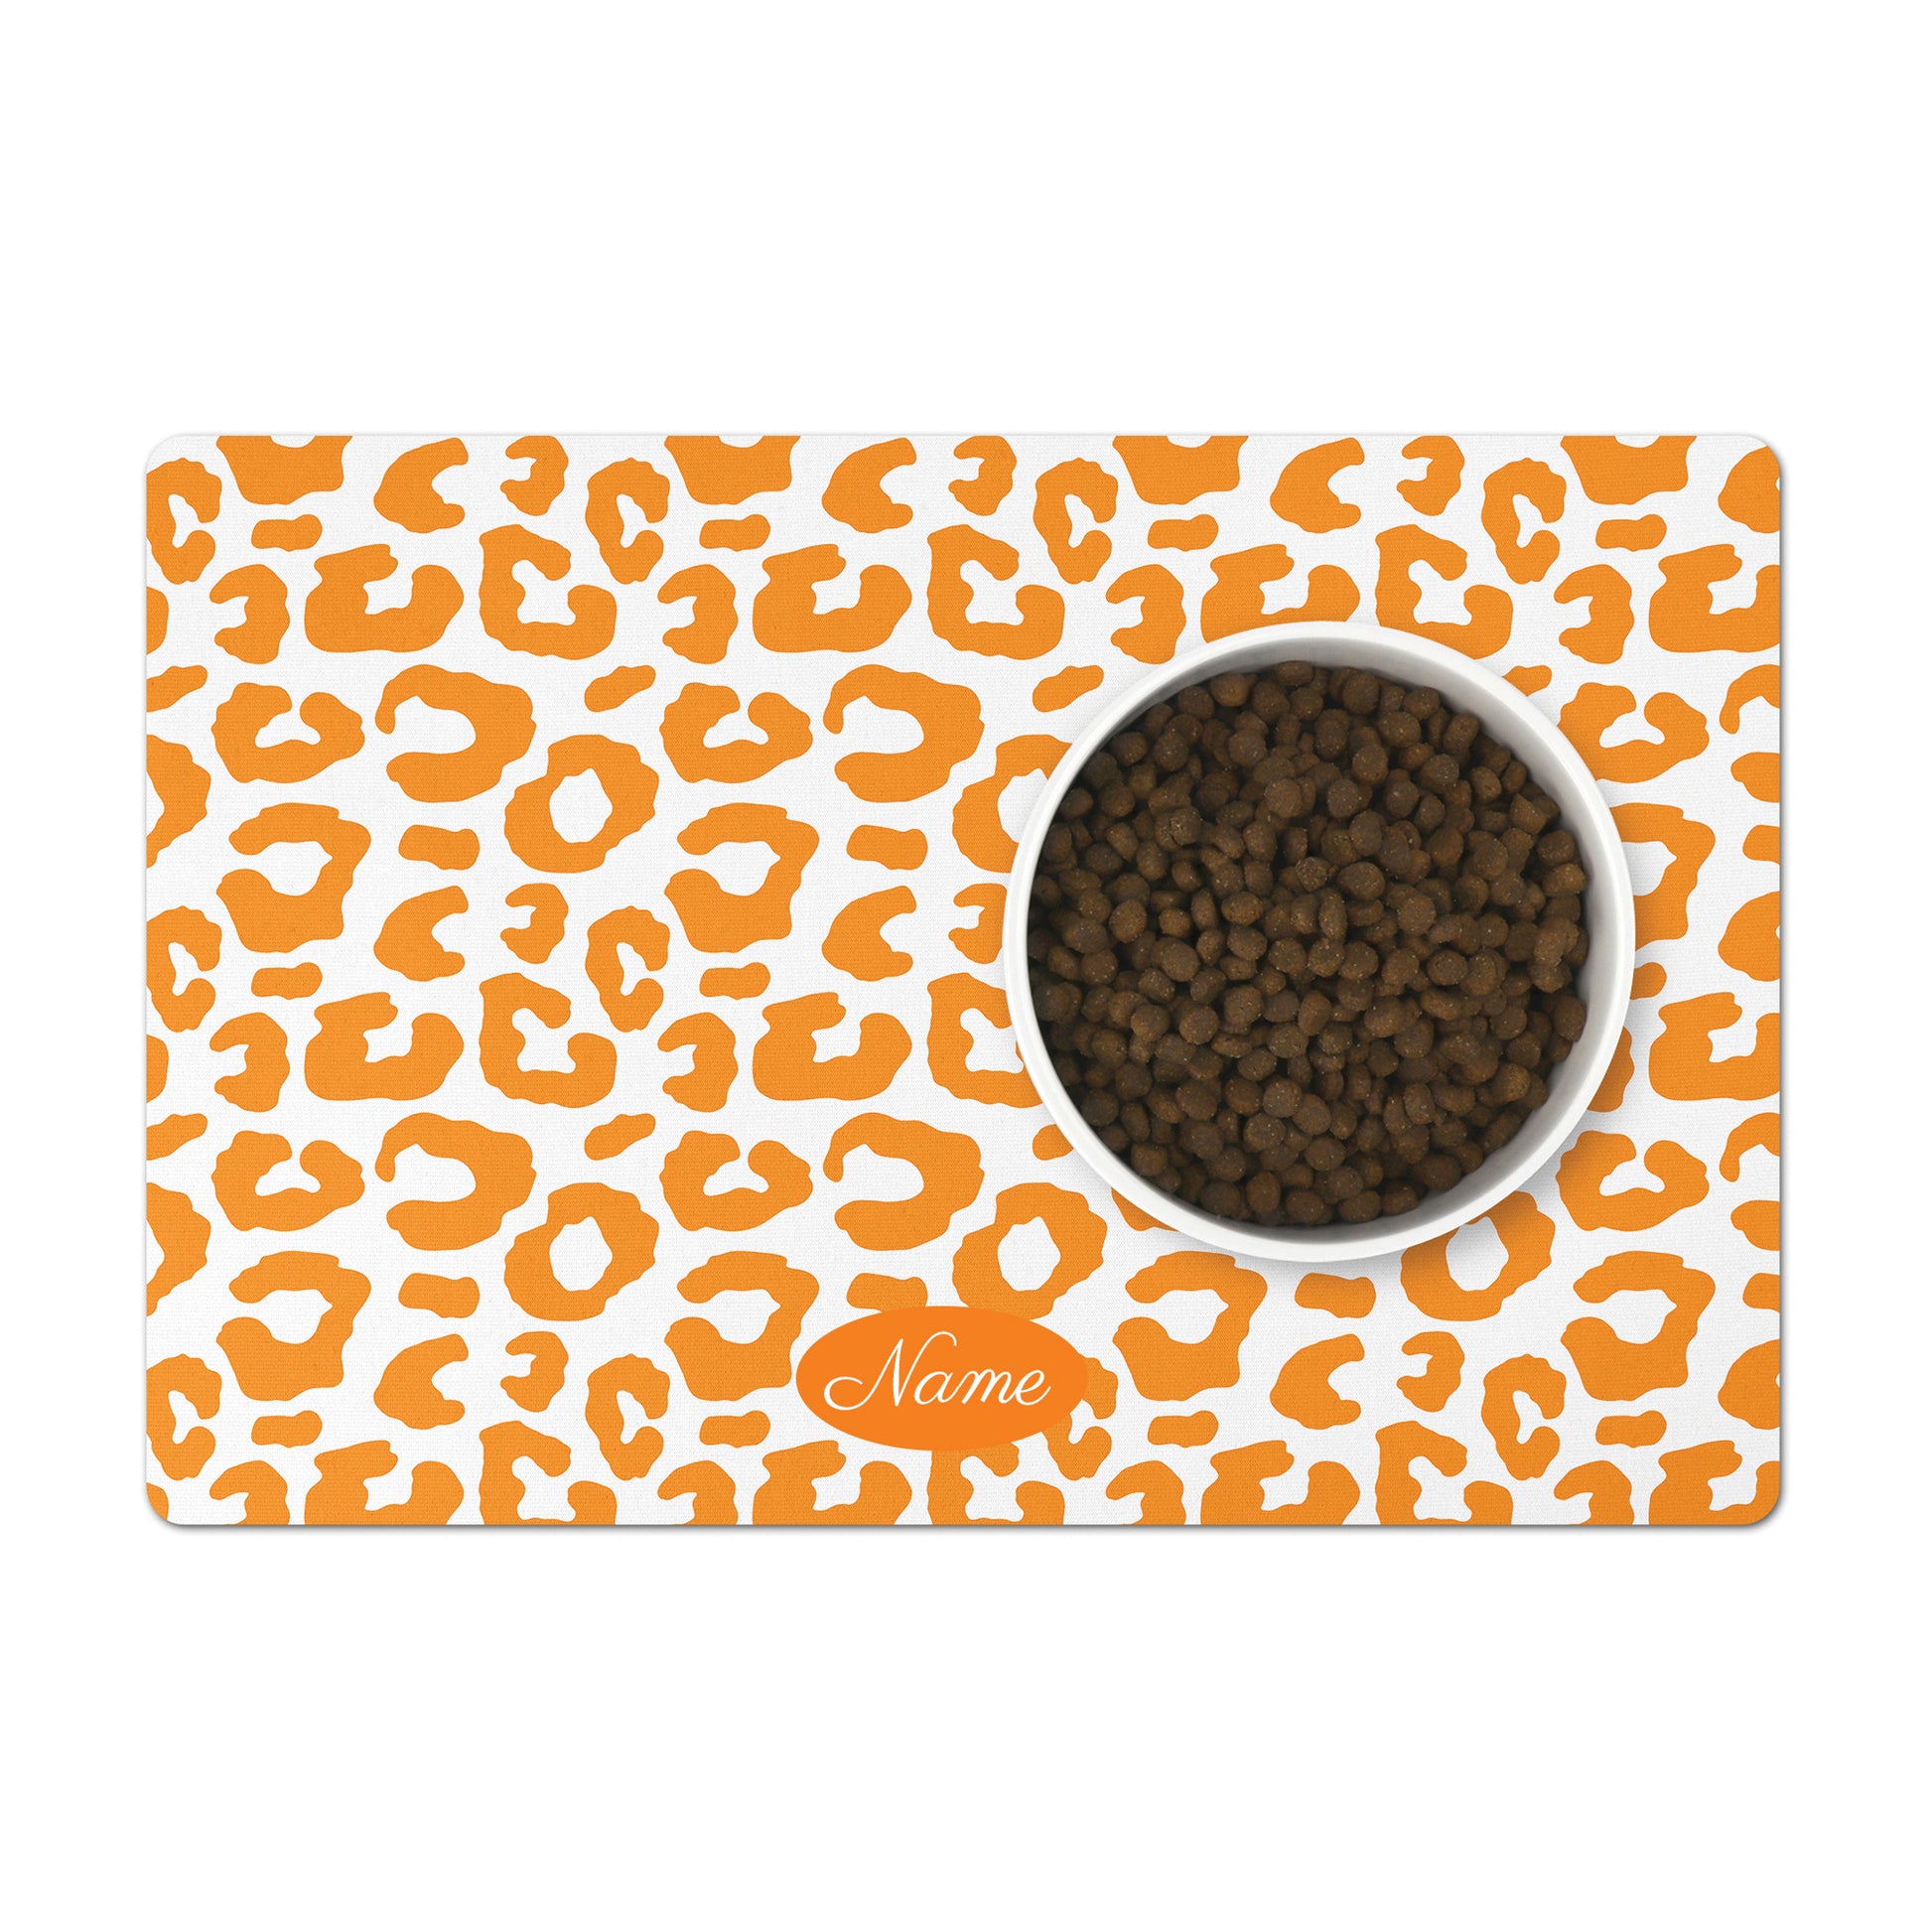 Orange and white leopard pet mat is personalized with any name or word for your dog or cat.